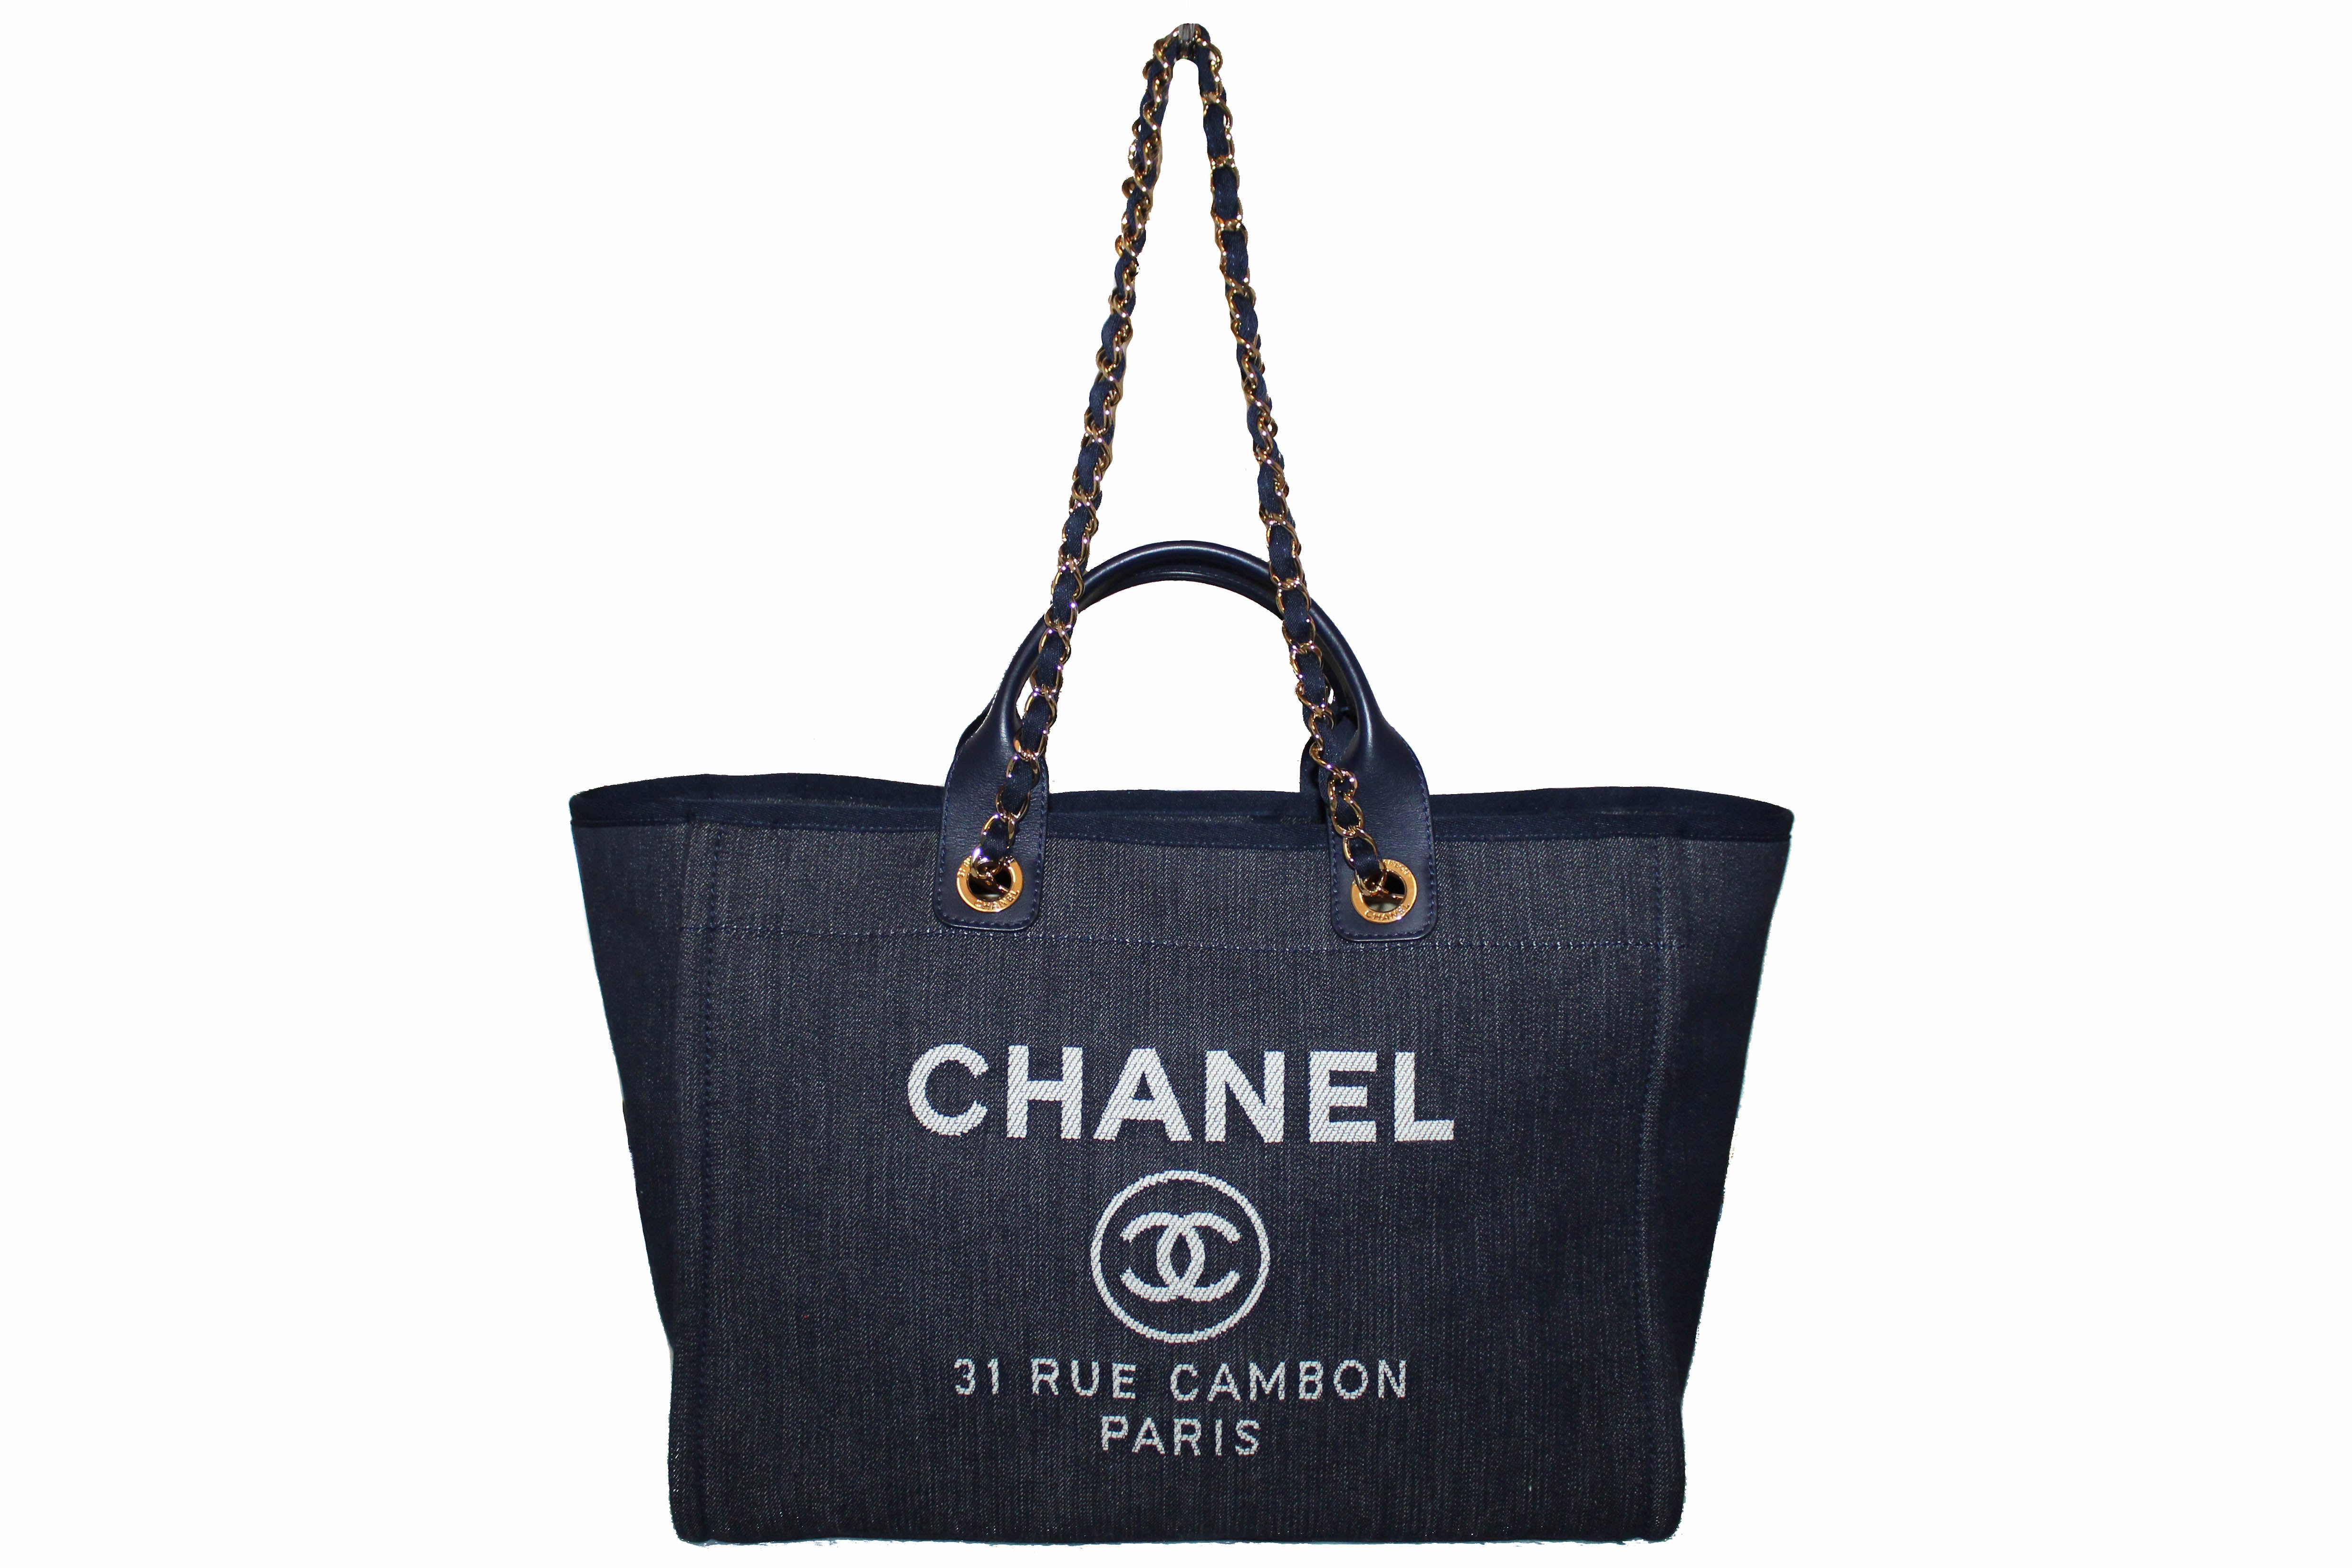 Chanel Small Deauville Shopping Bag - Pink Totes, Handbags